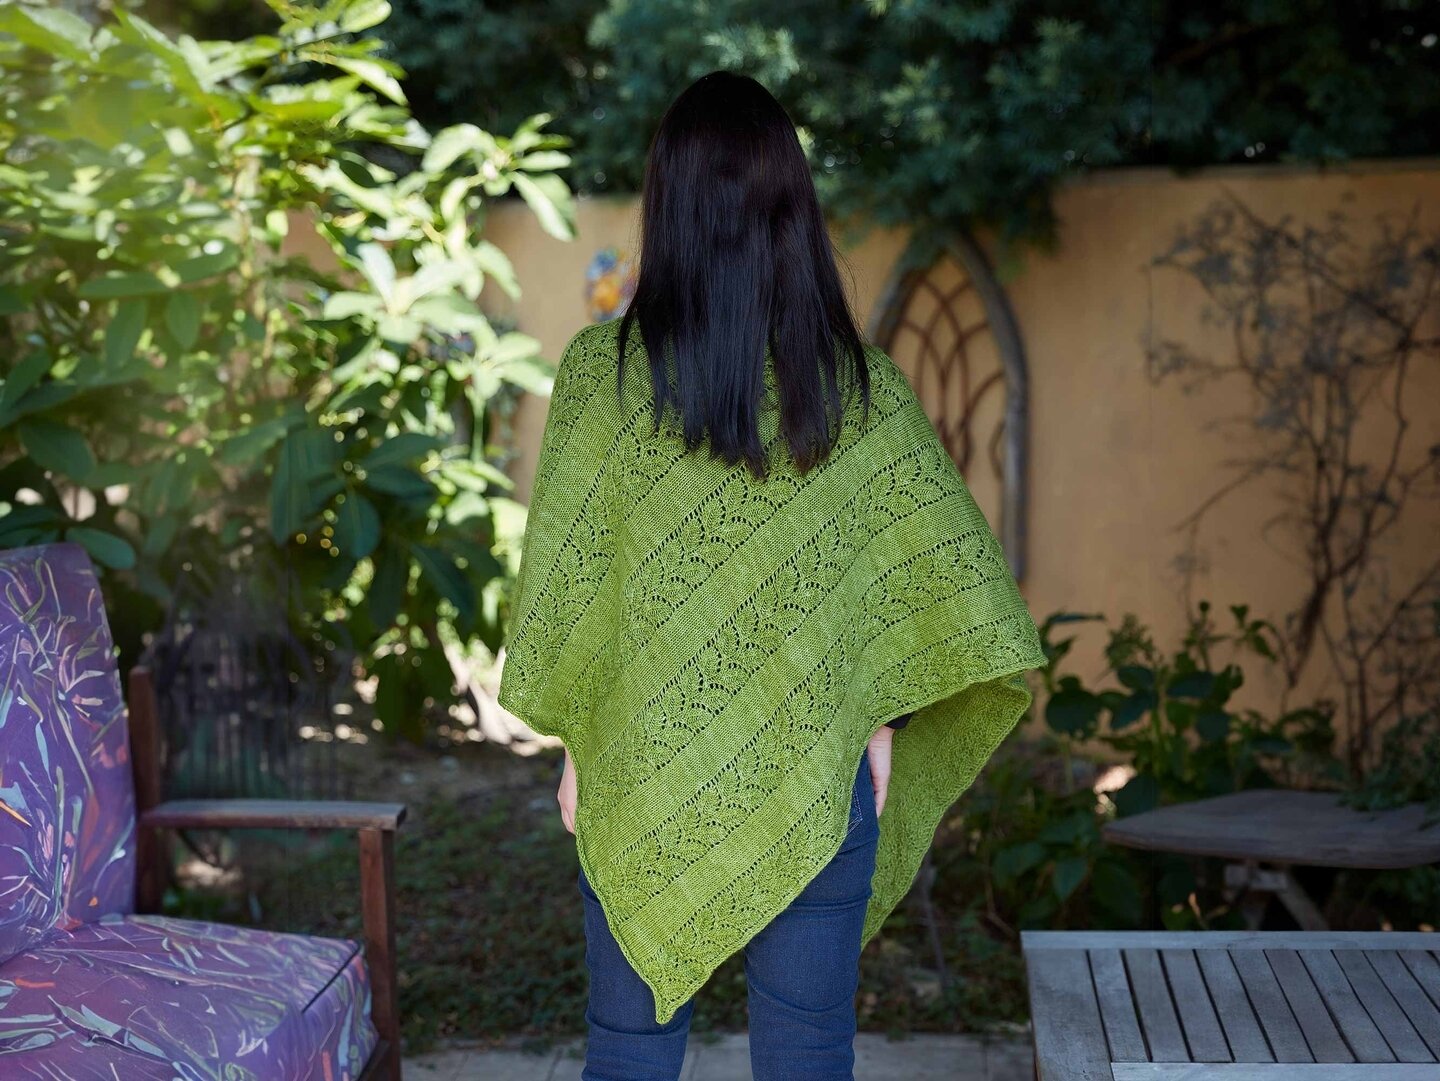 After starting on this journey almost two years ago, Esprit d'Evelyn is out in the world!

With the help of my newsletter subscribers who participated in a poll to choose design options and @seachangefibers gorgeous Swale non-superwash yarn in this b